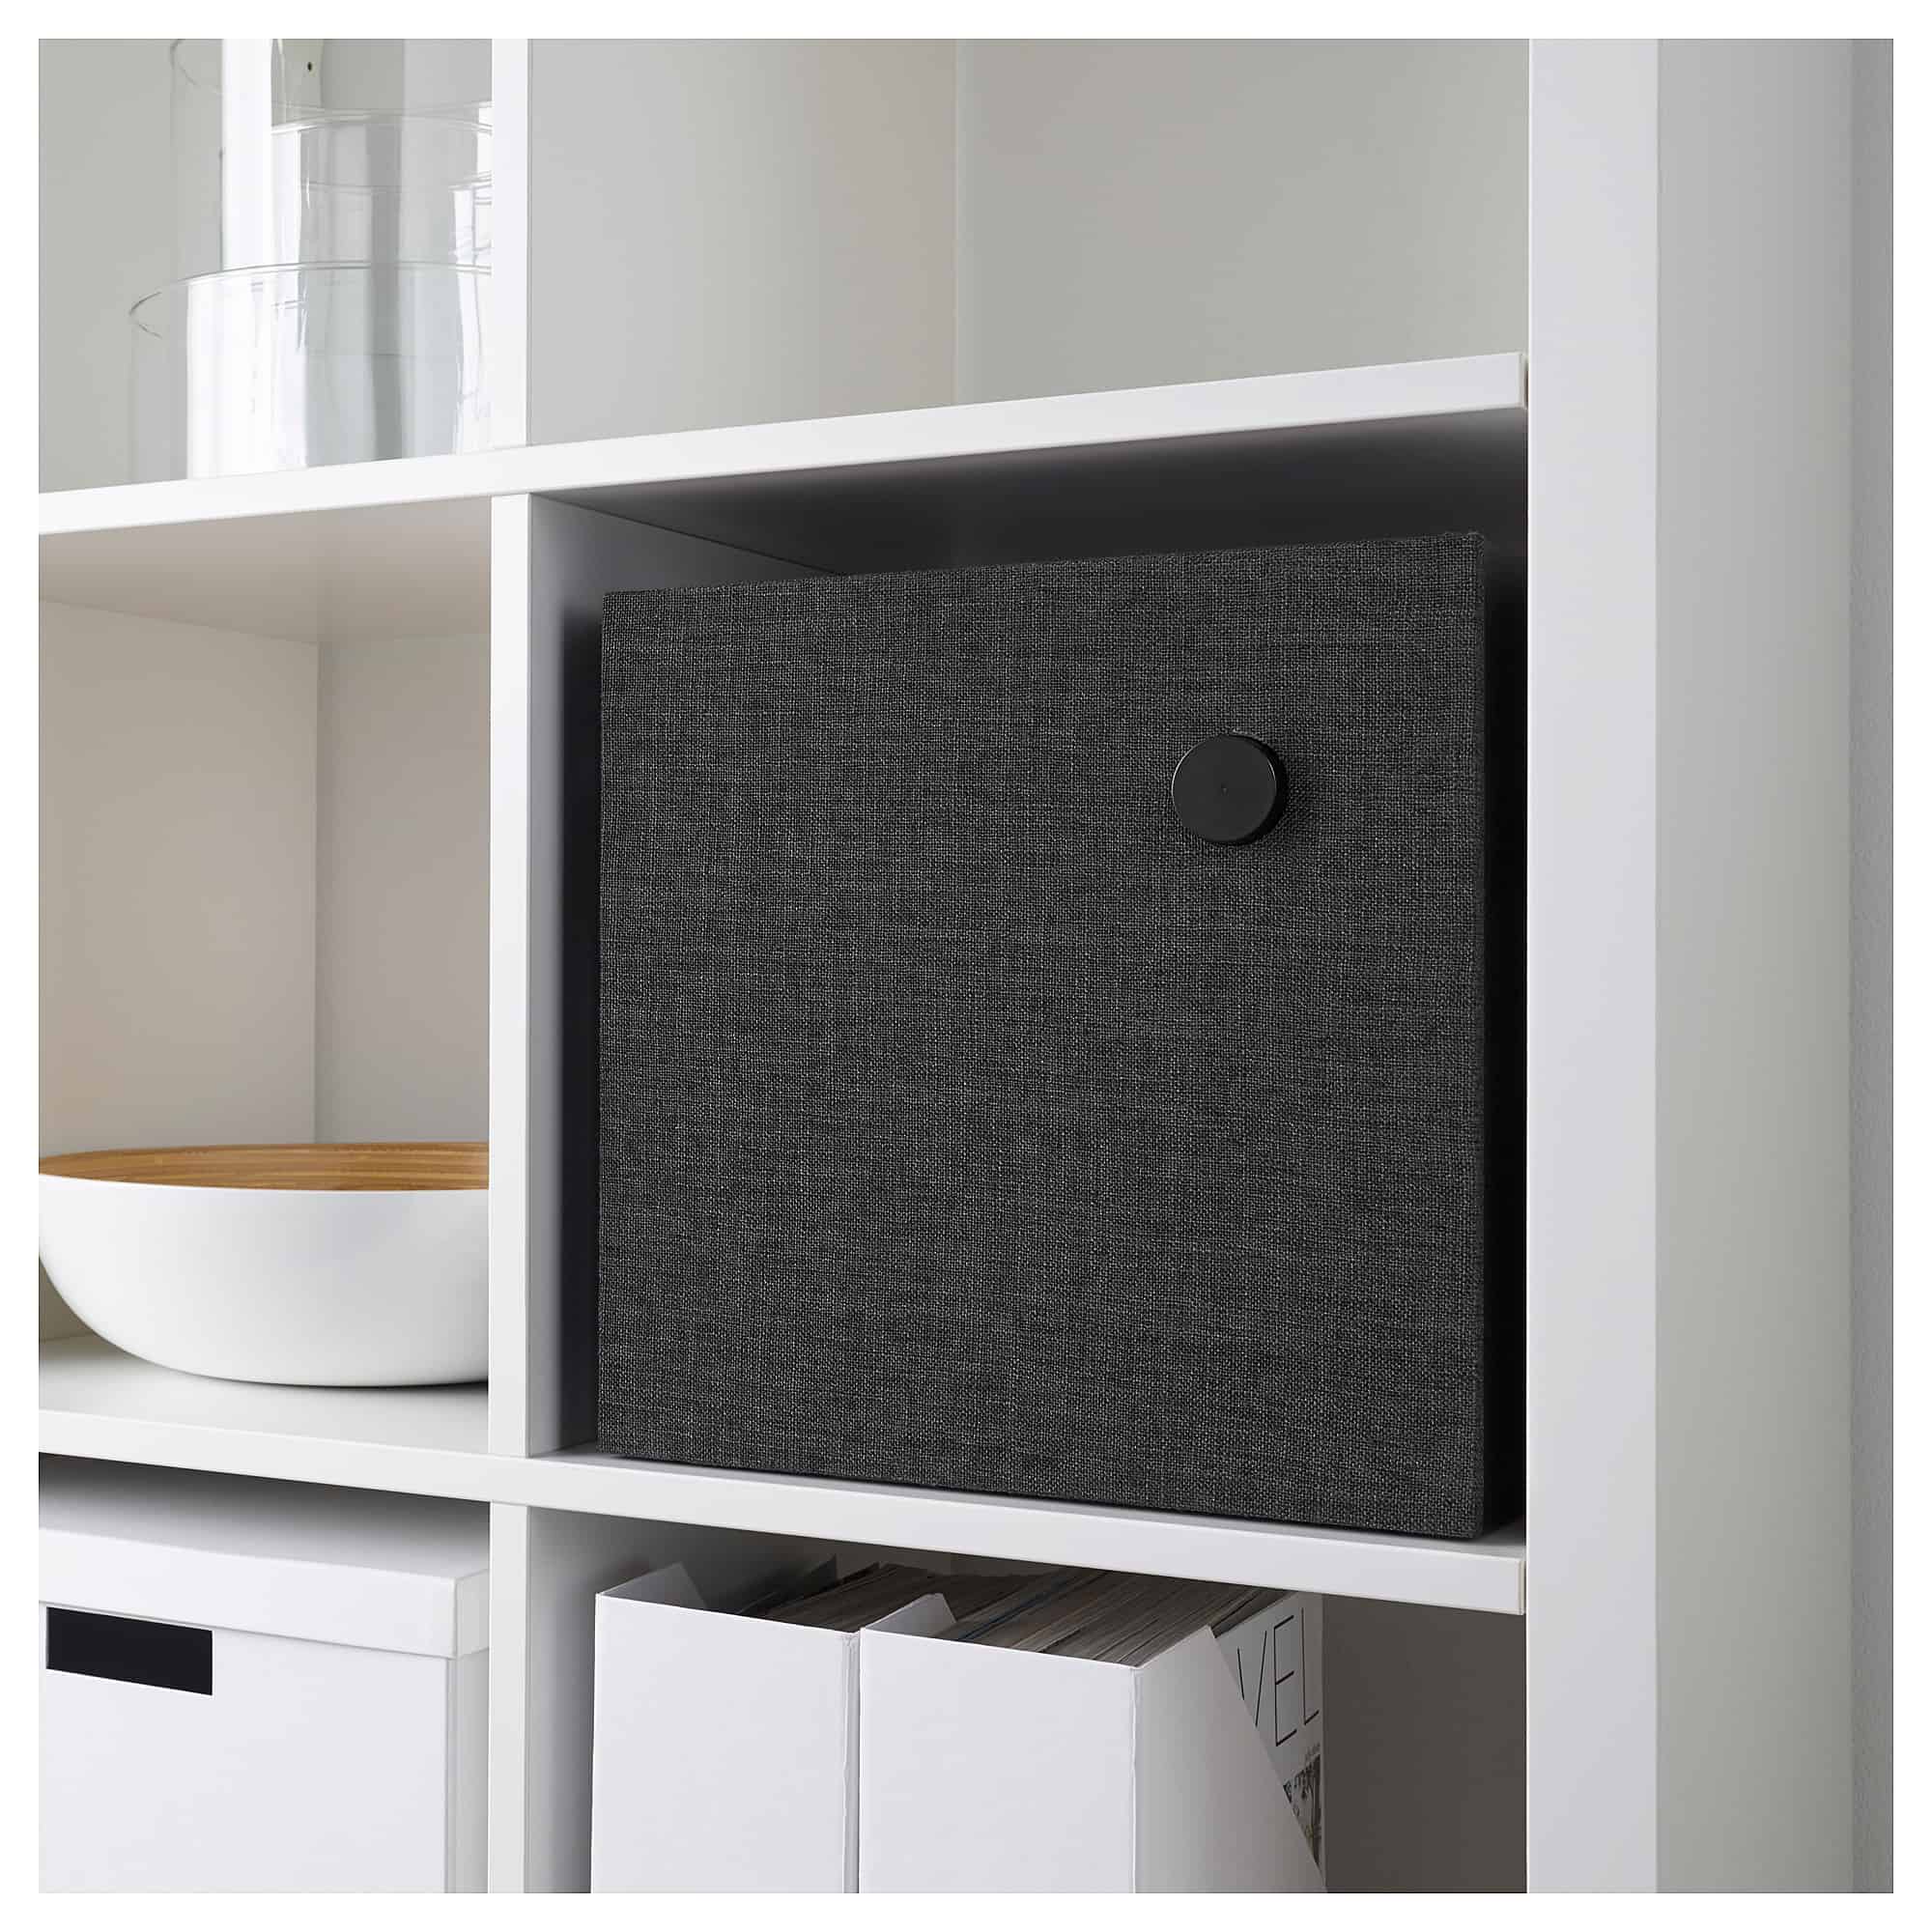 The 12-inch Eneby fits right into your other Ikea furniture.